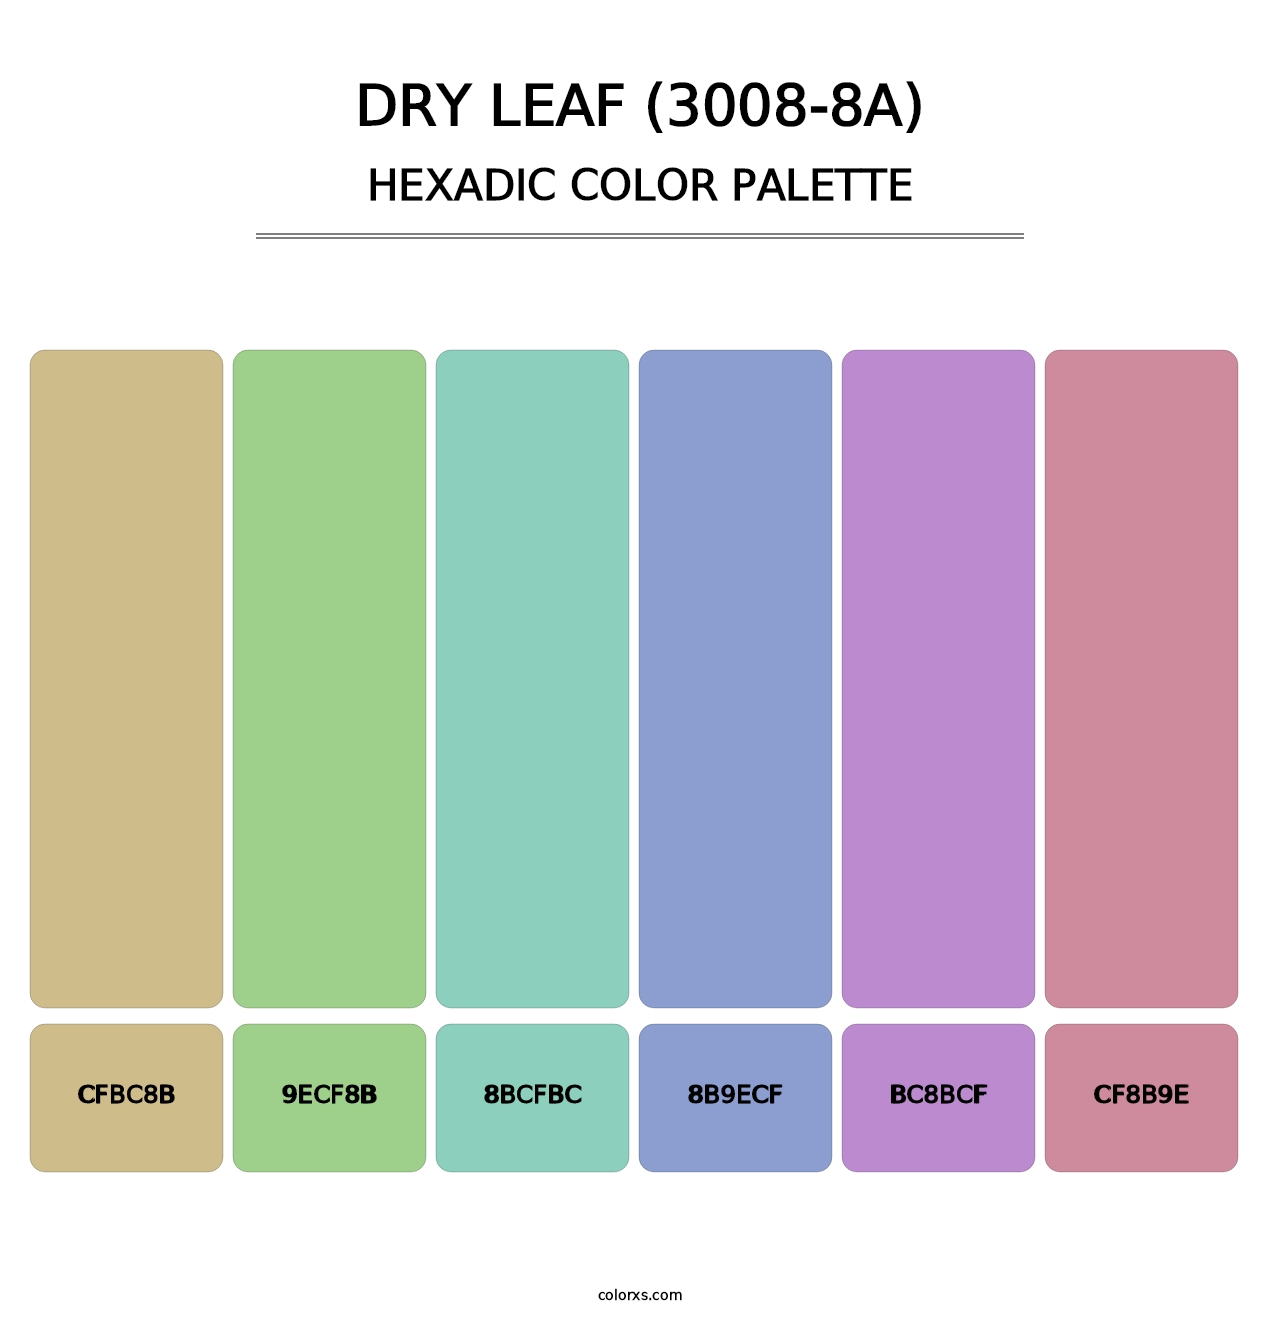 Dry Leaf (3008-8A) - Hexadic Color Palette